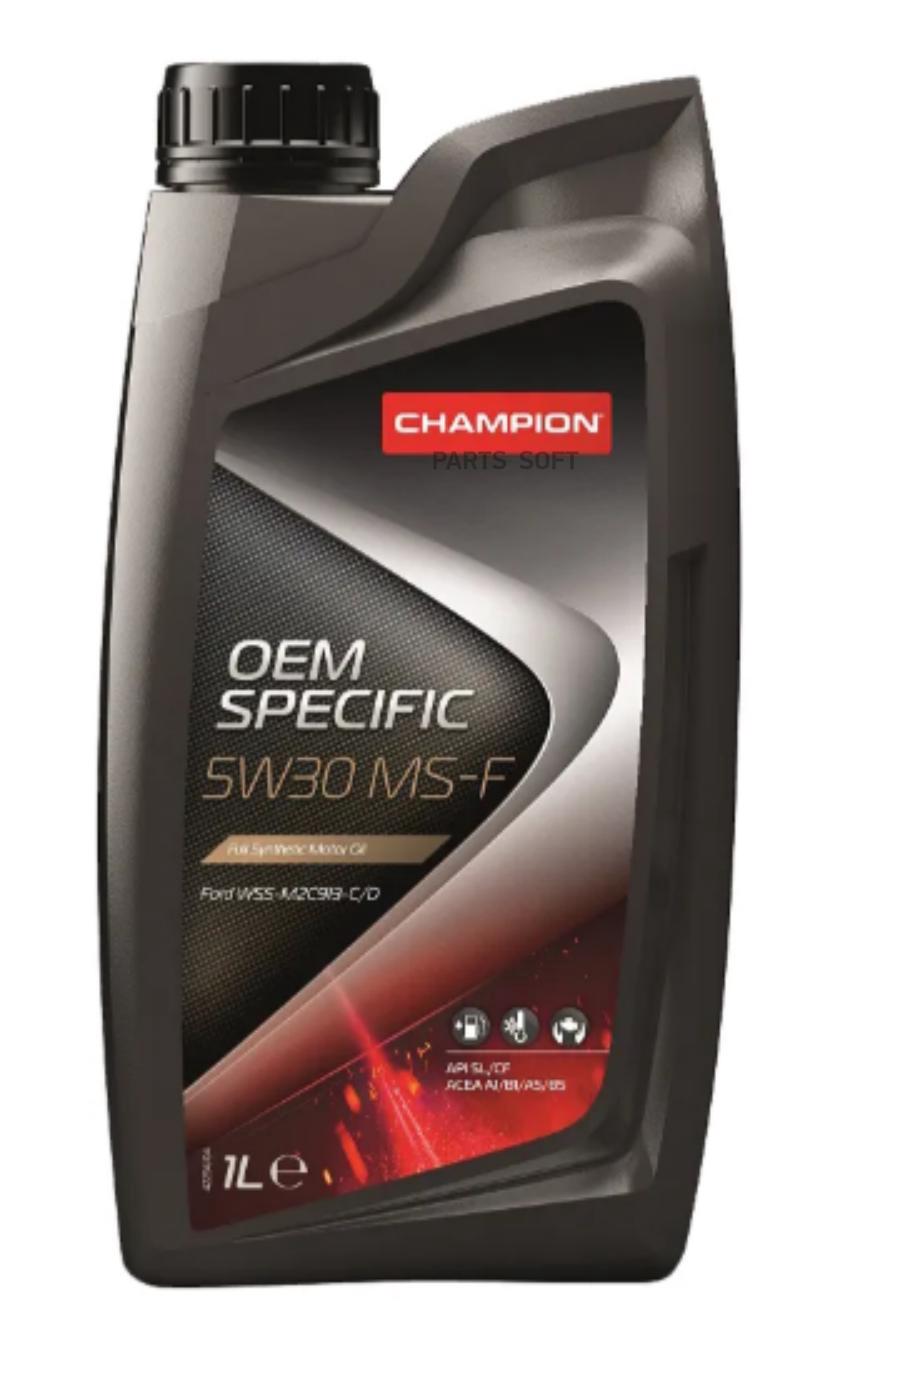 Масло Моторное CHAMPION OIL Oem Specific 5W30 Ms-F